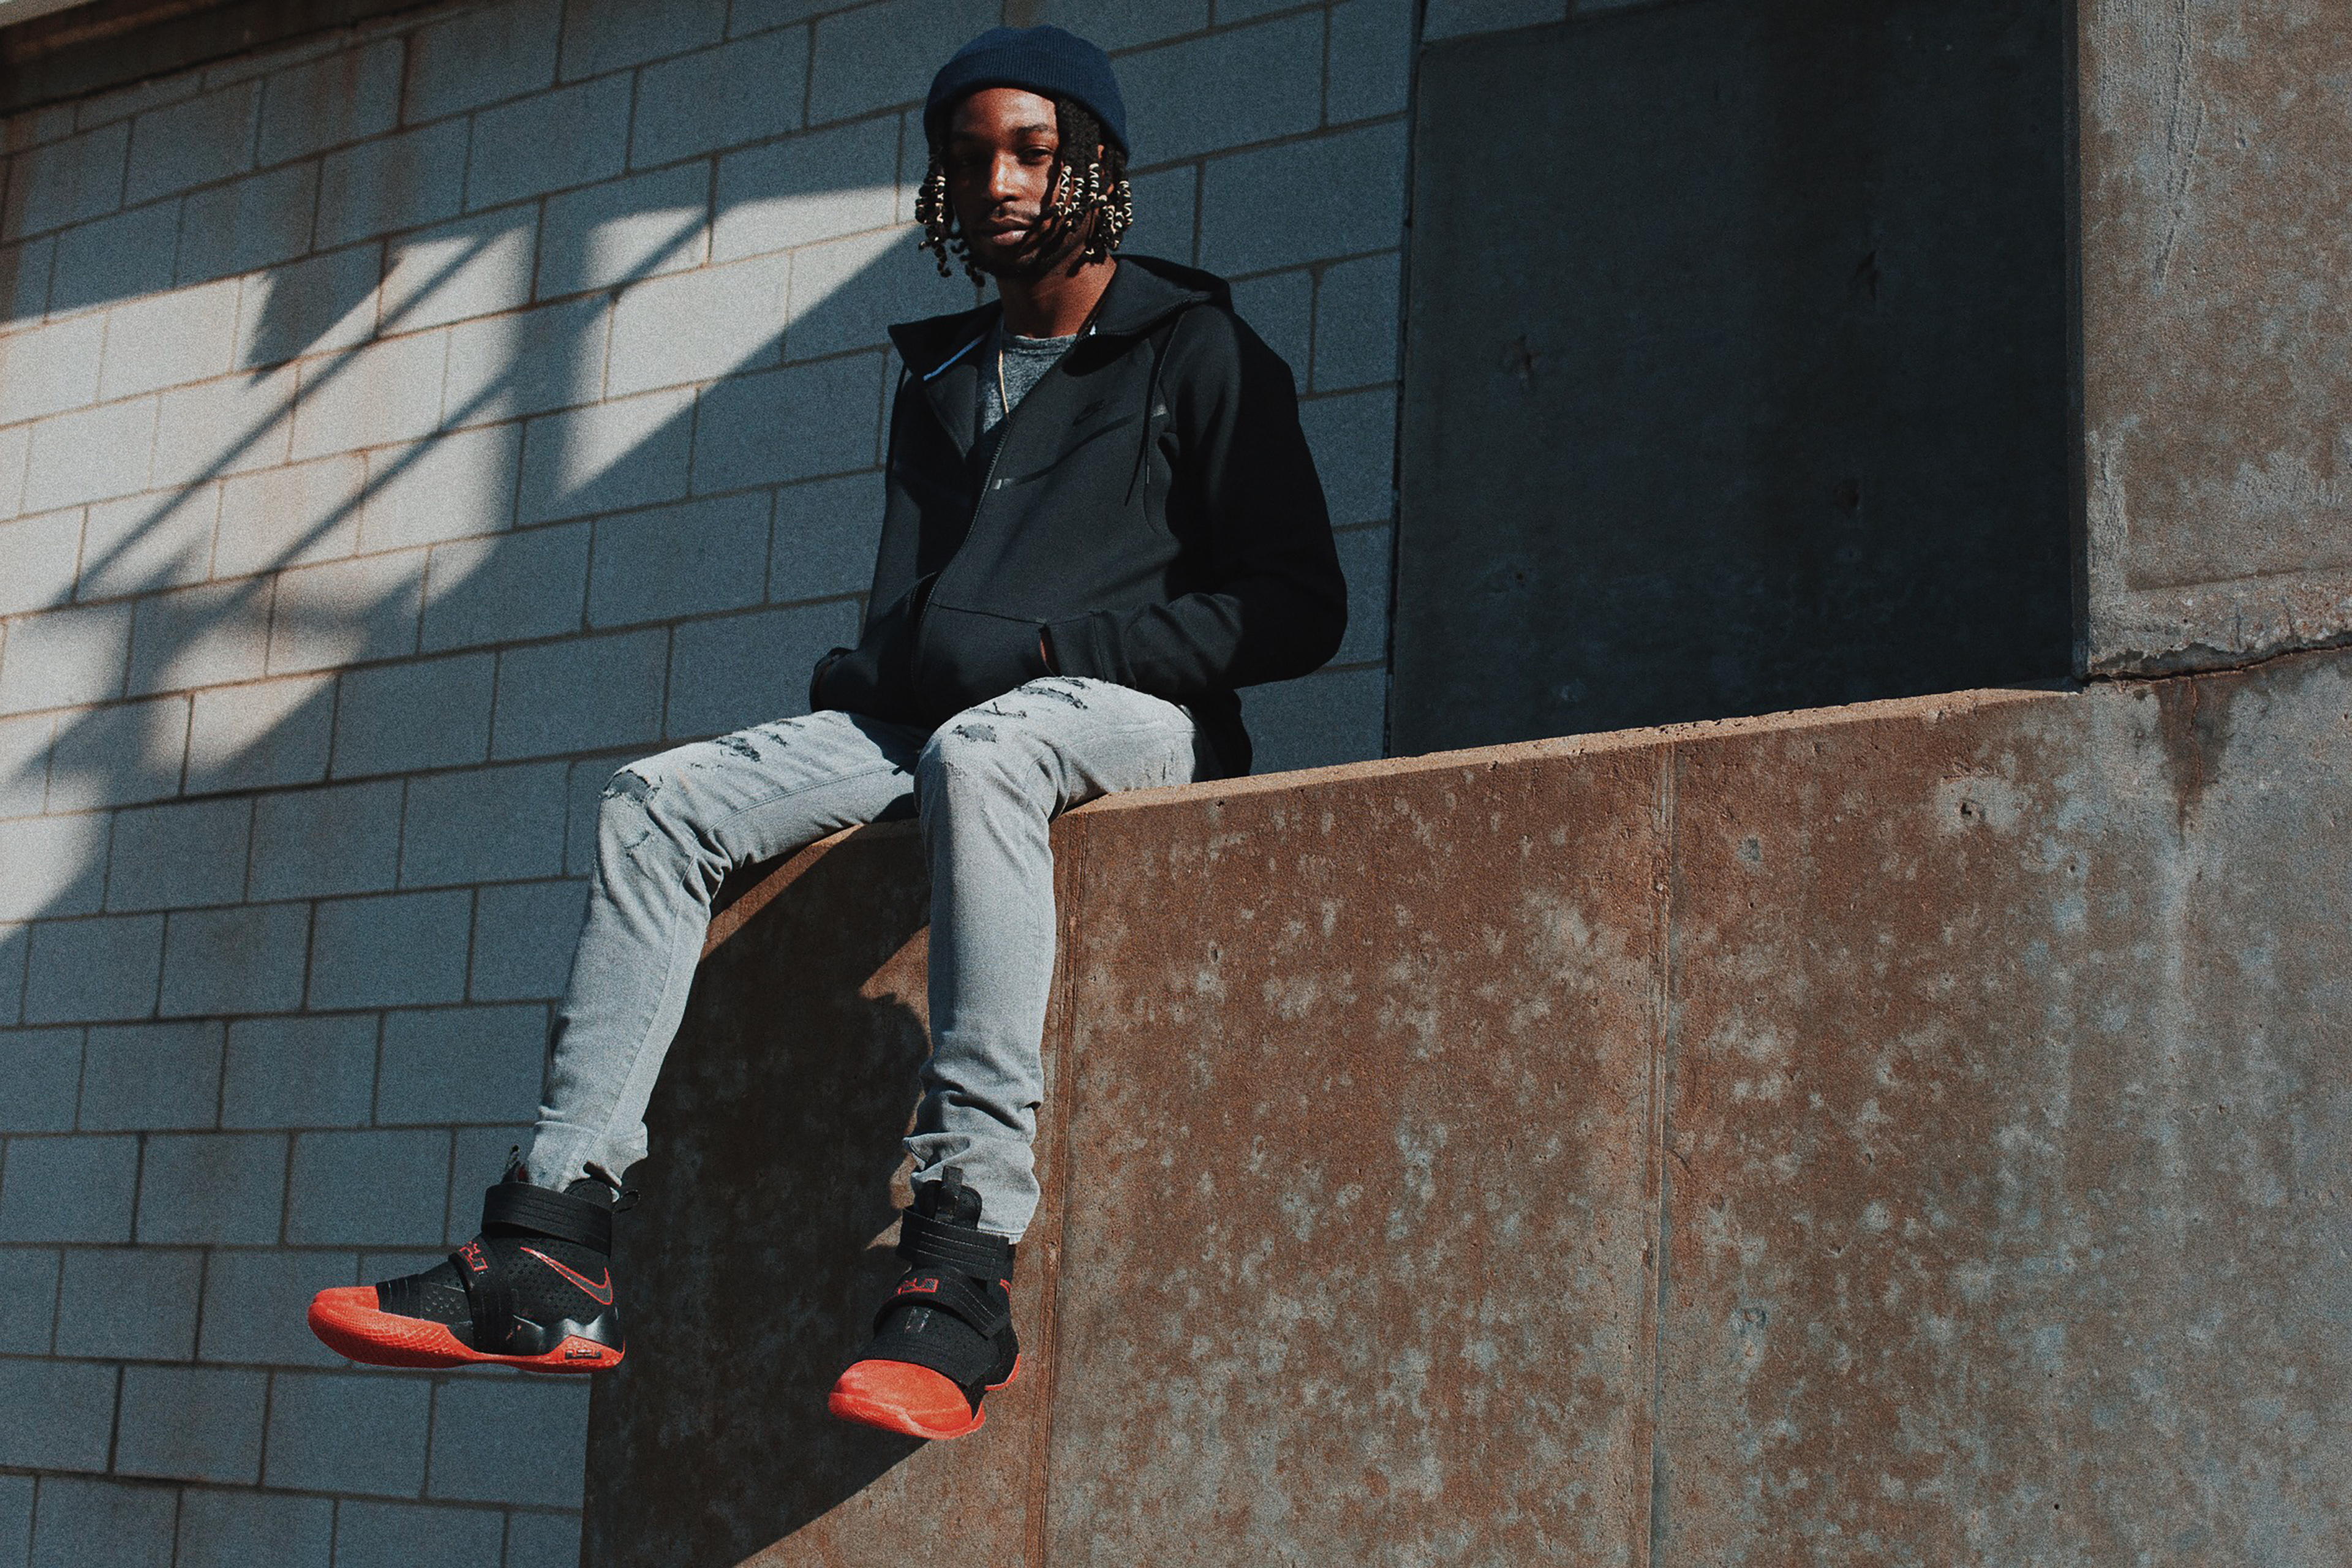 Nike LeBron Soldier X lookbook with Jazz Cartier